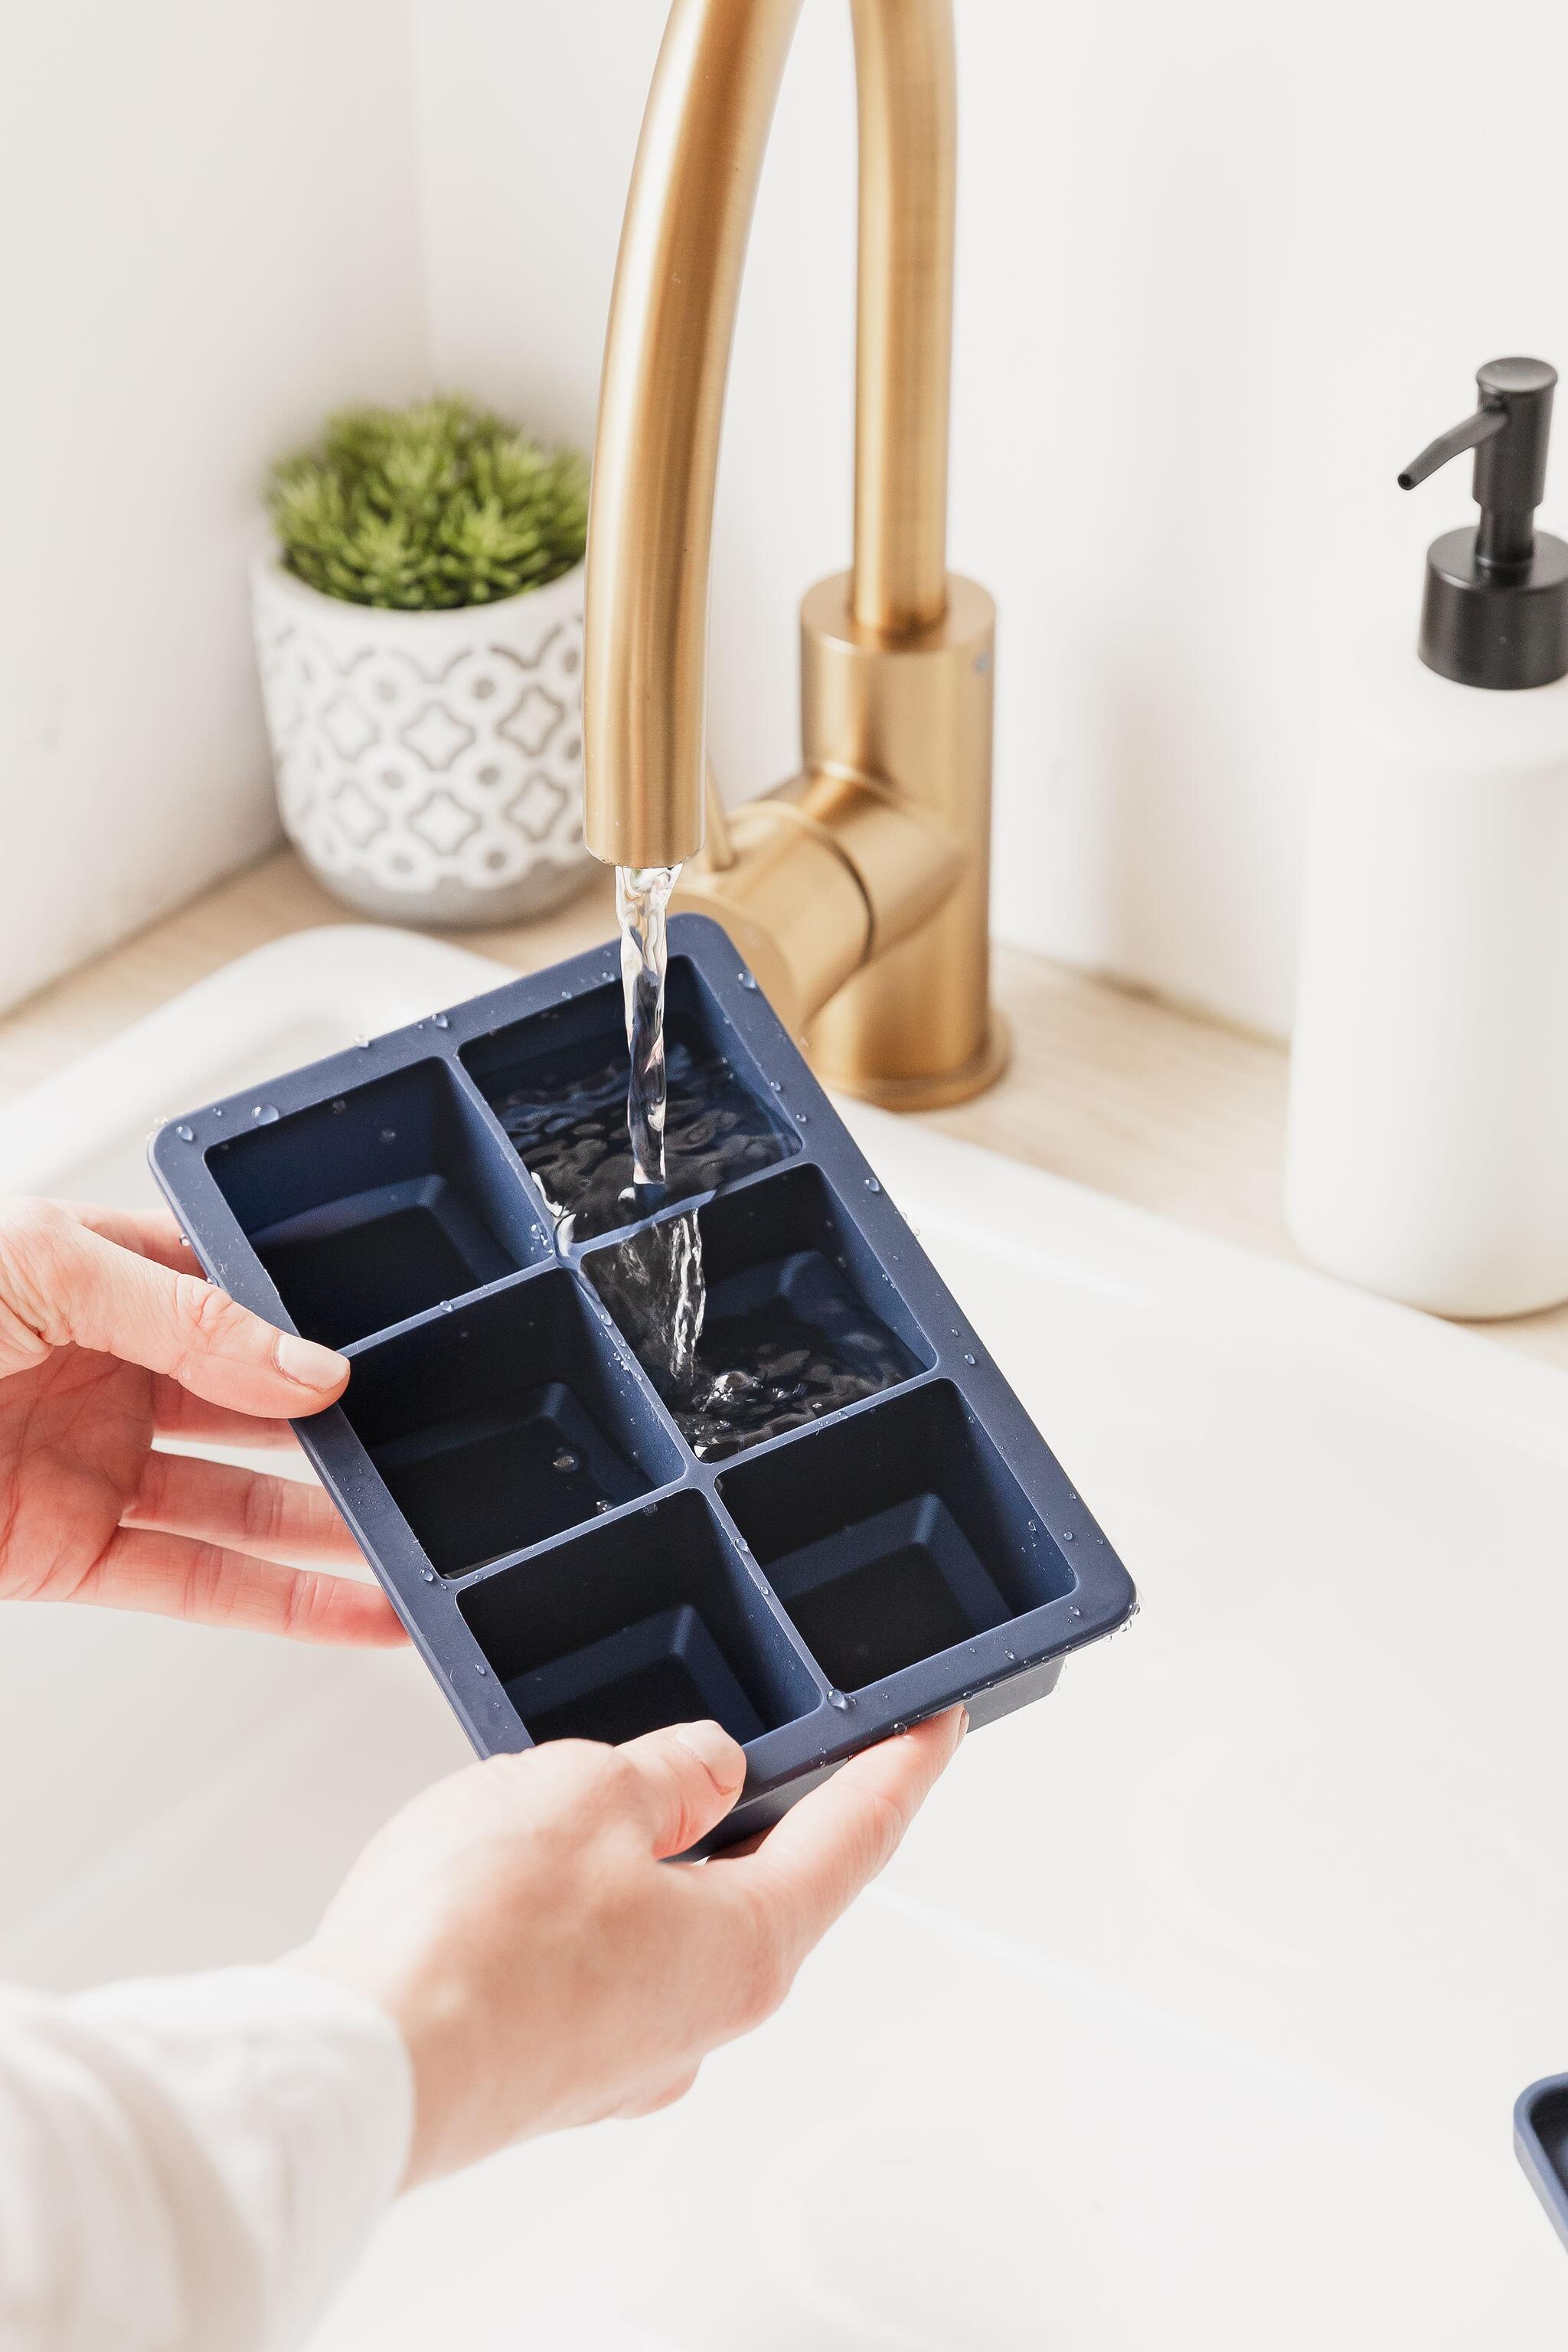 Uberstar Giant Ice Cube Tray - Only £10.99